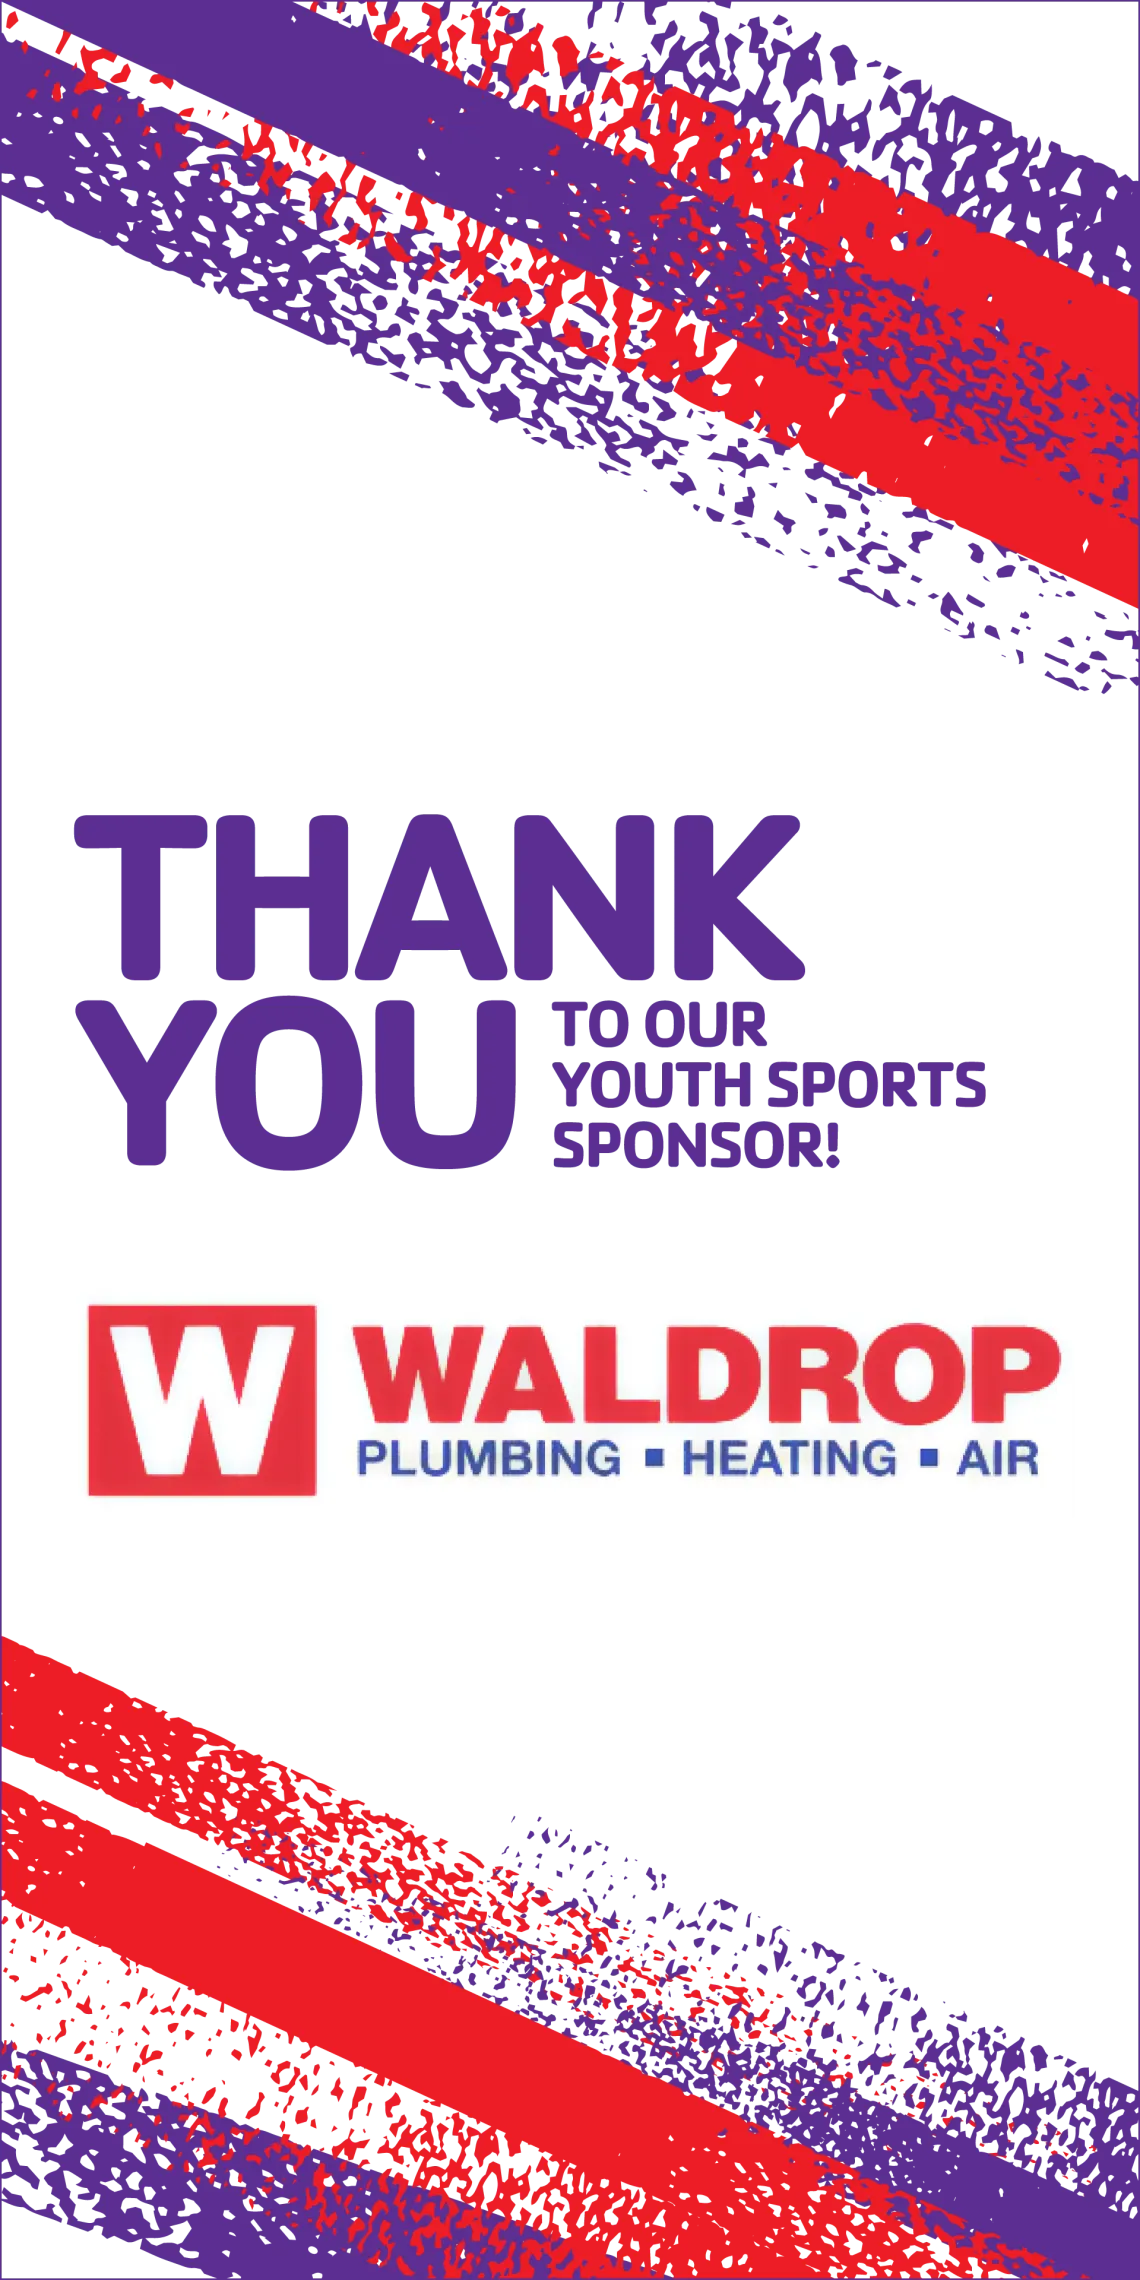 Thanks to Waldrop as our Youth Sport Sponsor!